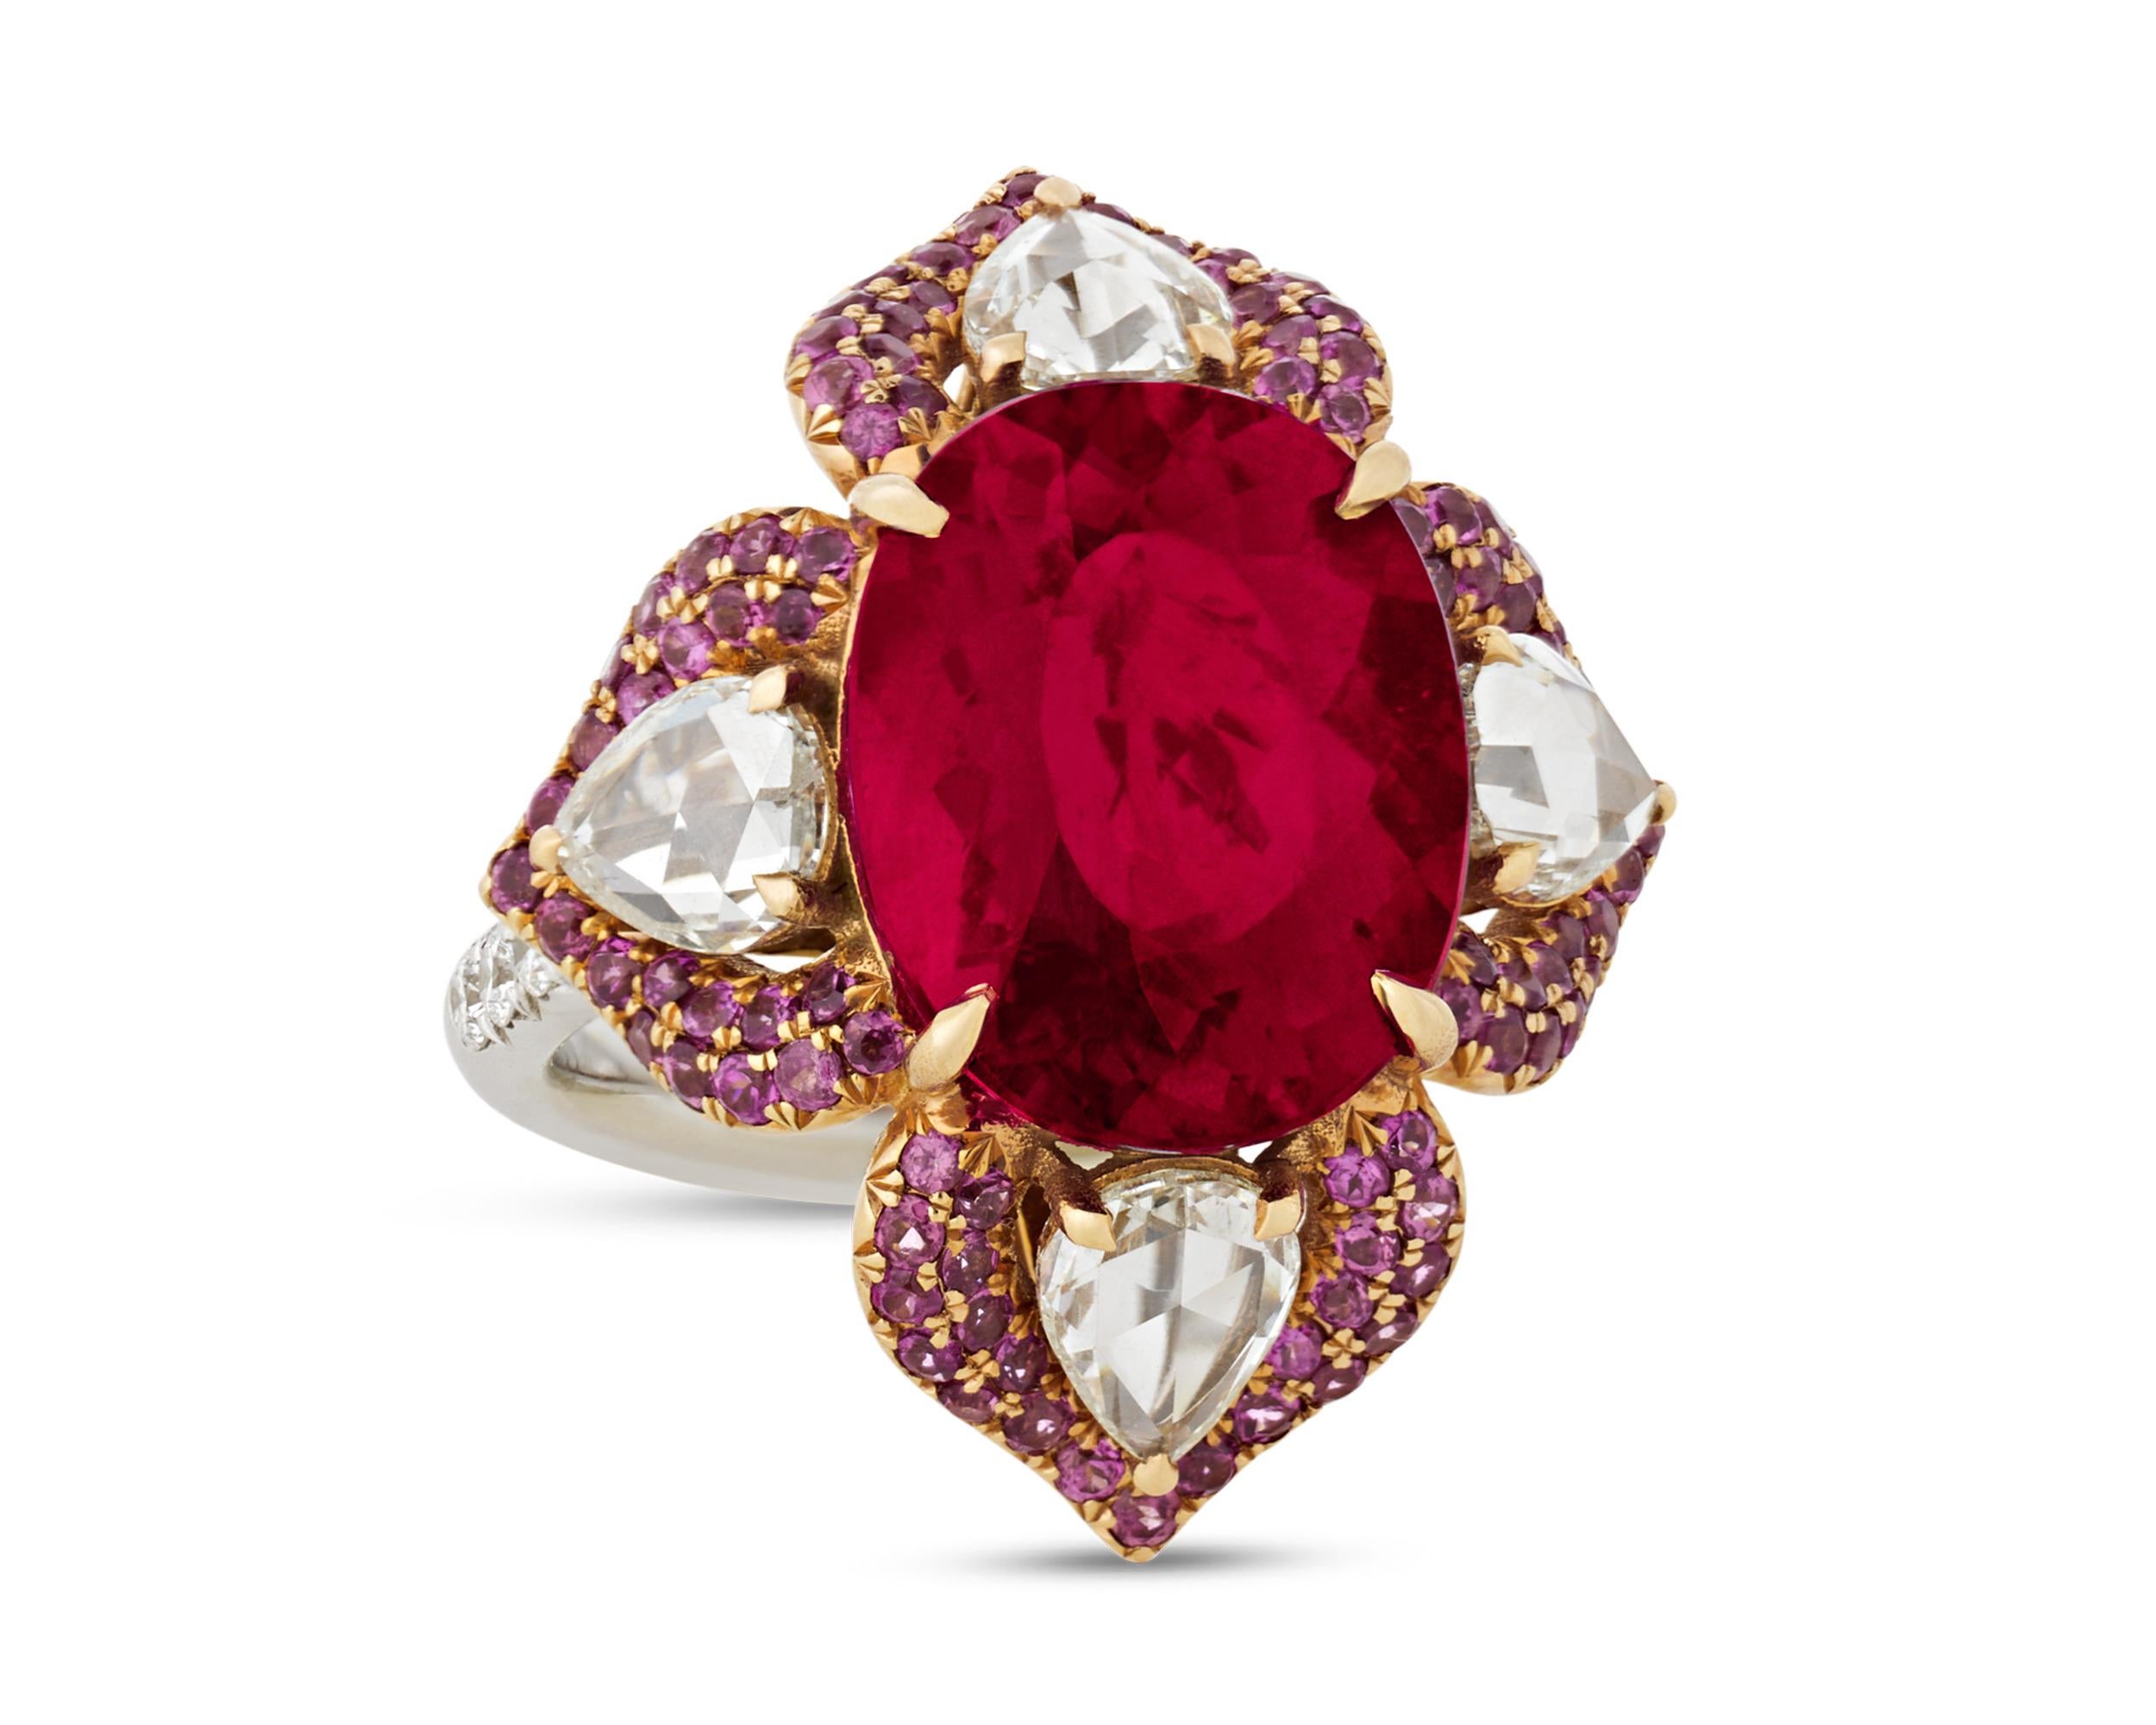 The gems of this visually striking ring come together to form a deep red floral motif. The large central rubellite tourmaline totals 9.41 carats, and displays its coveted vibrant and rich red hue. Accented by 1.37 carats of pink garnets and 0.21